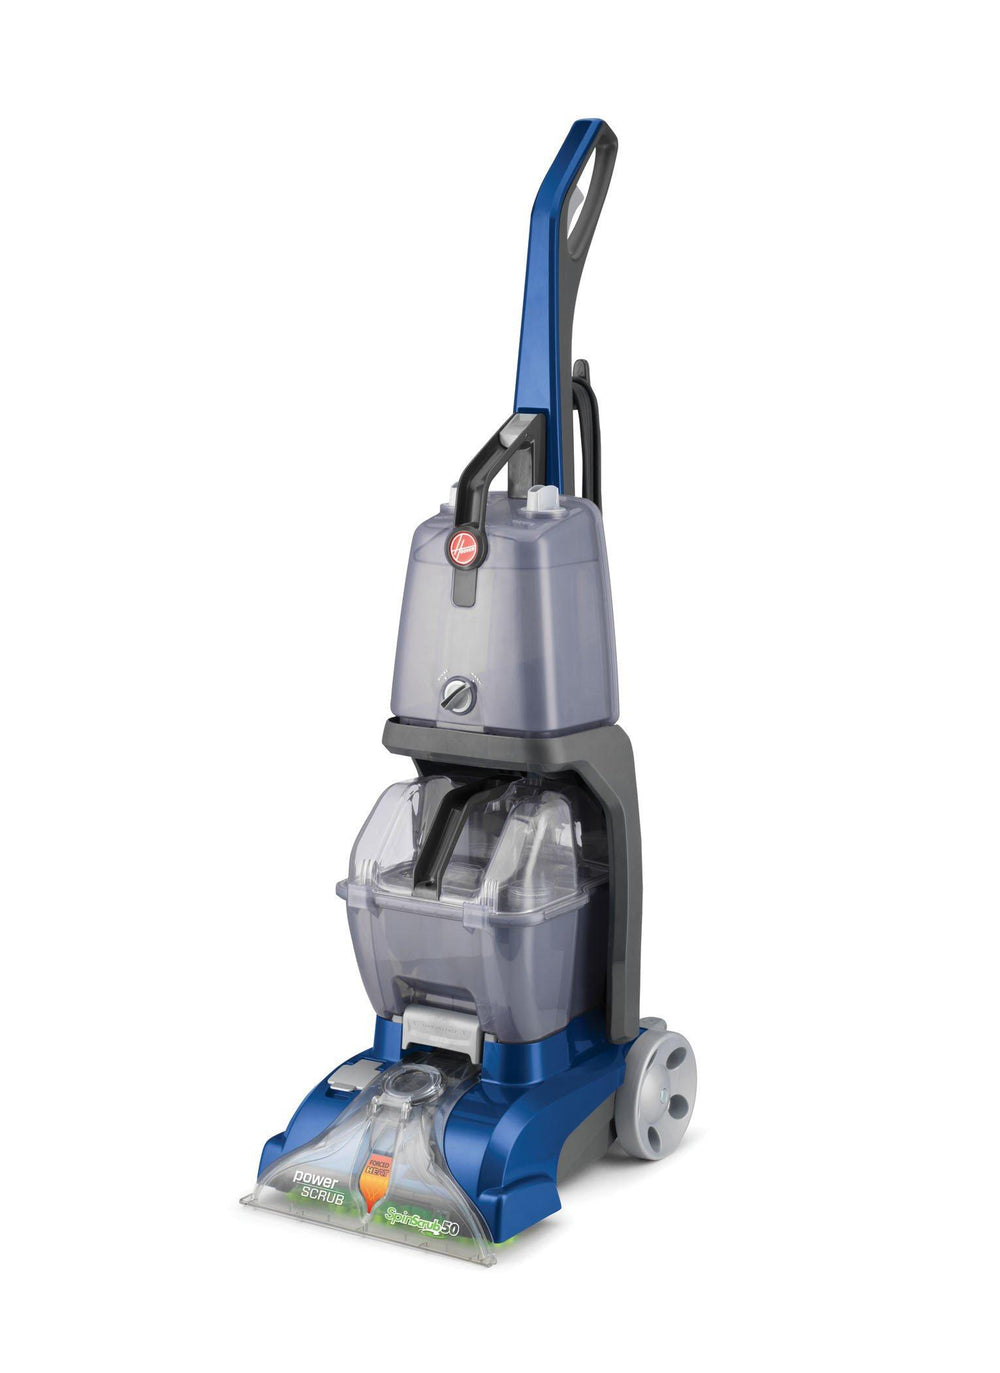 Reconditioned Power Scrub Carpet Cleaner2